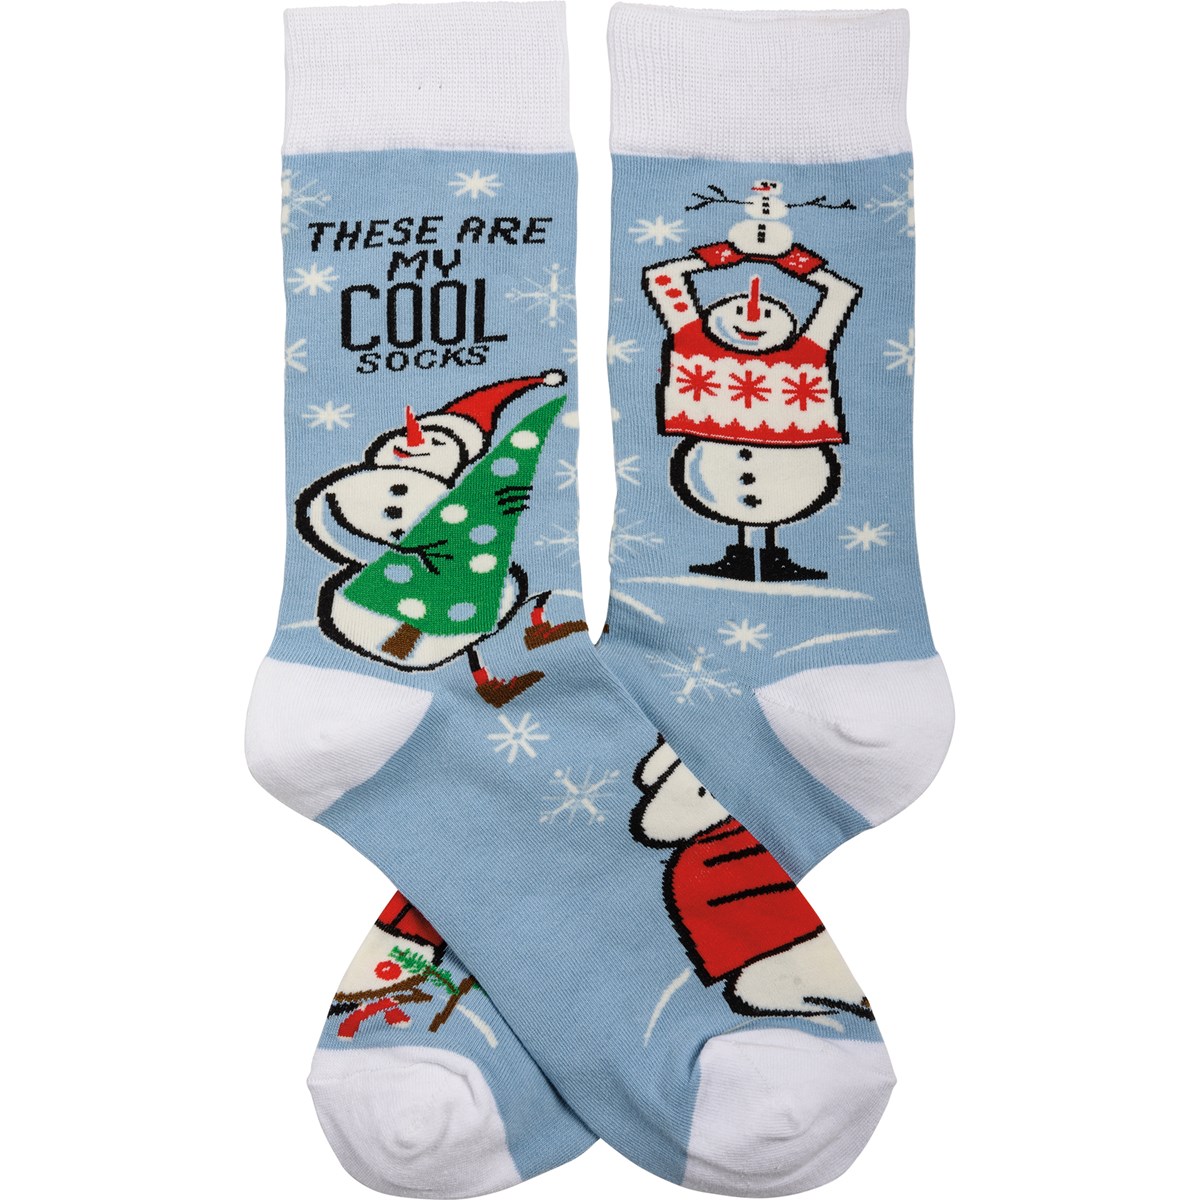 Socks - These Are My Cool Socks - One Size Fits Most - Cotton, Nylon, Spandex